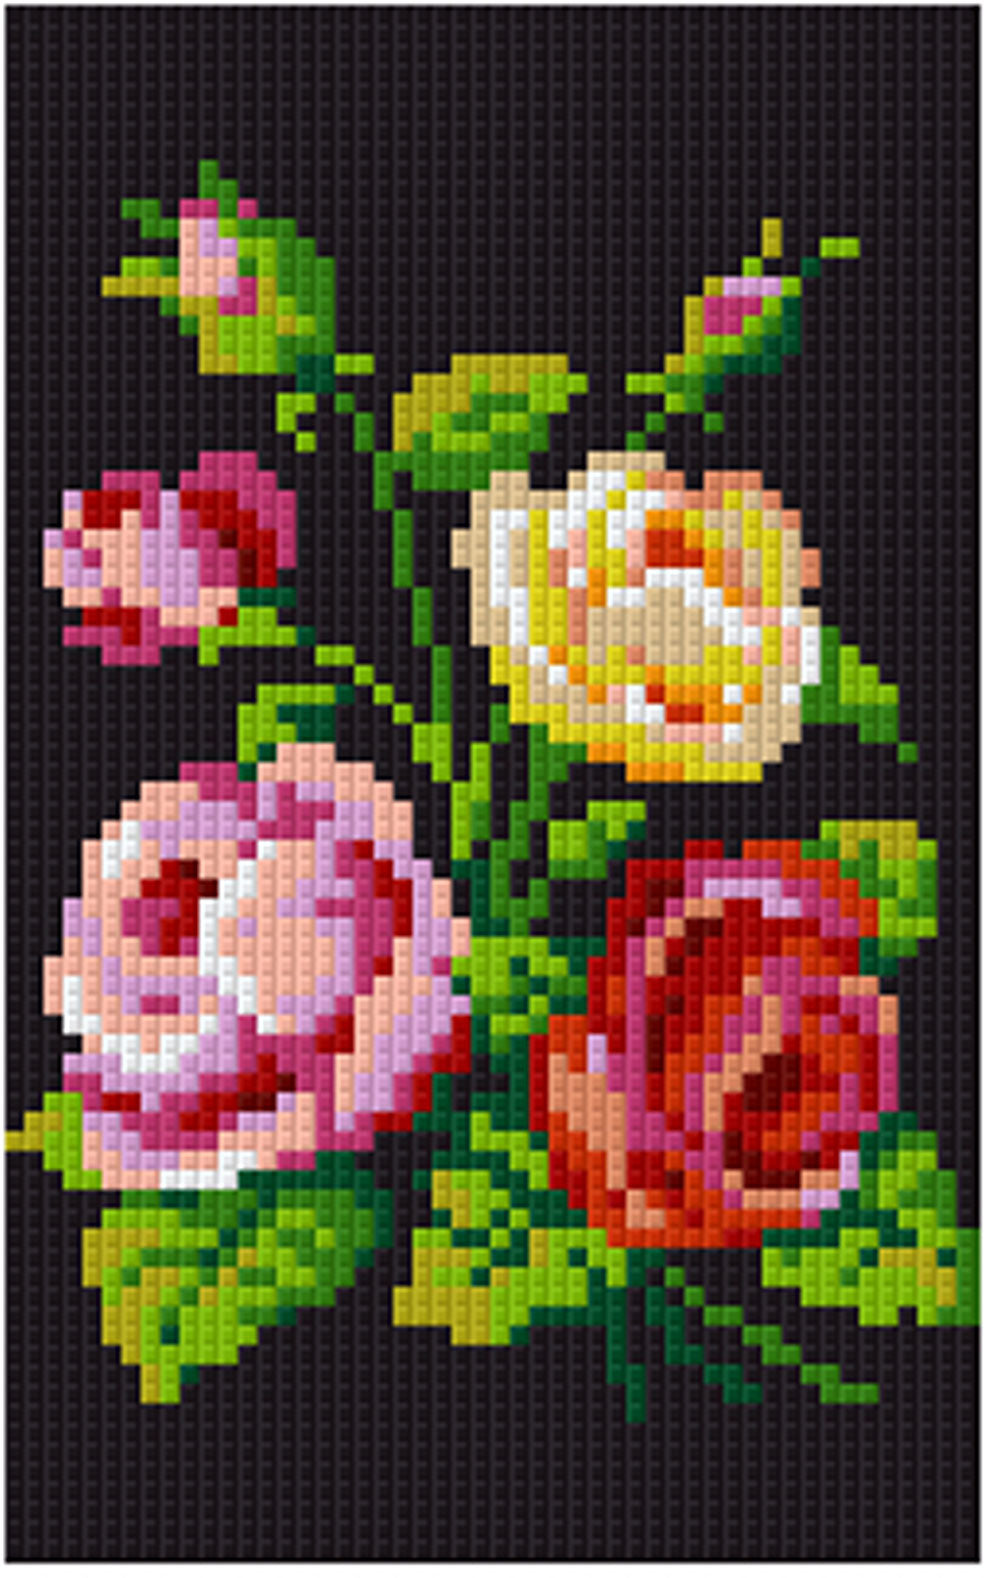 Pixel hobby classic set - colorful roses